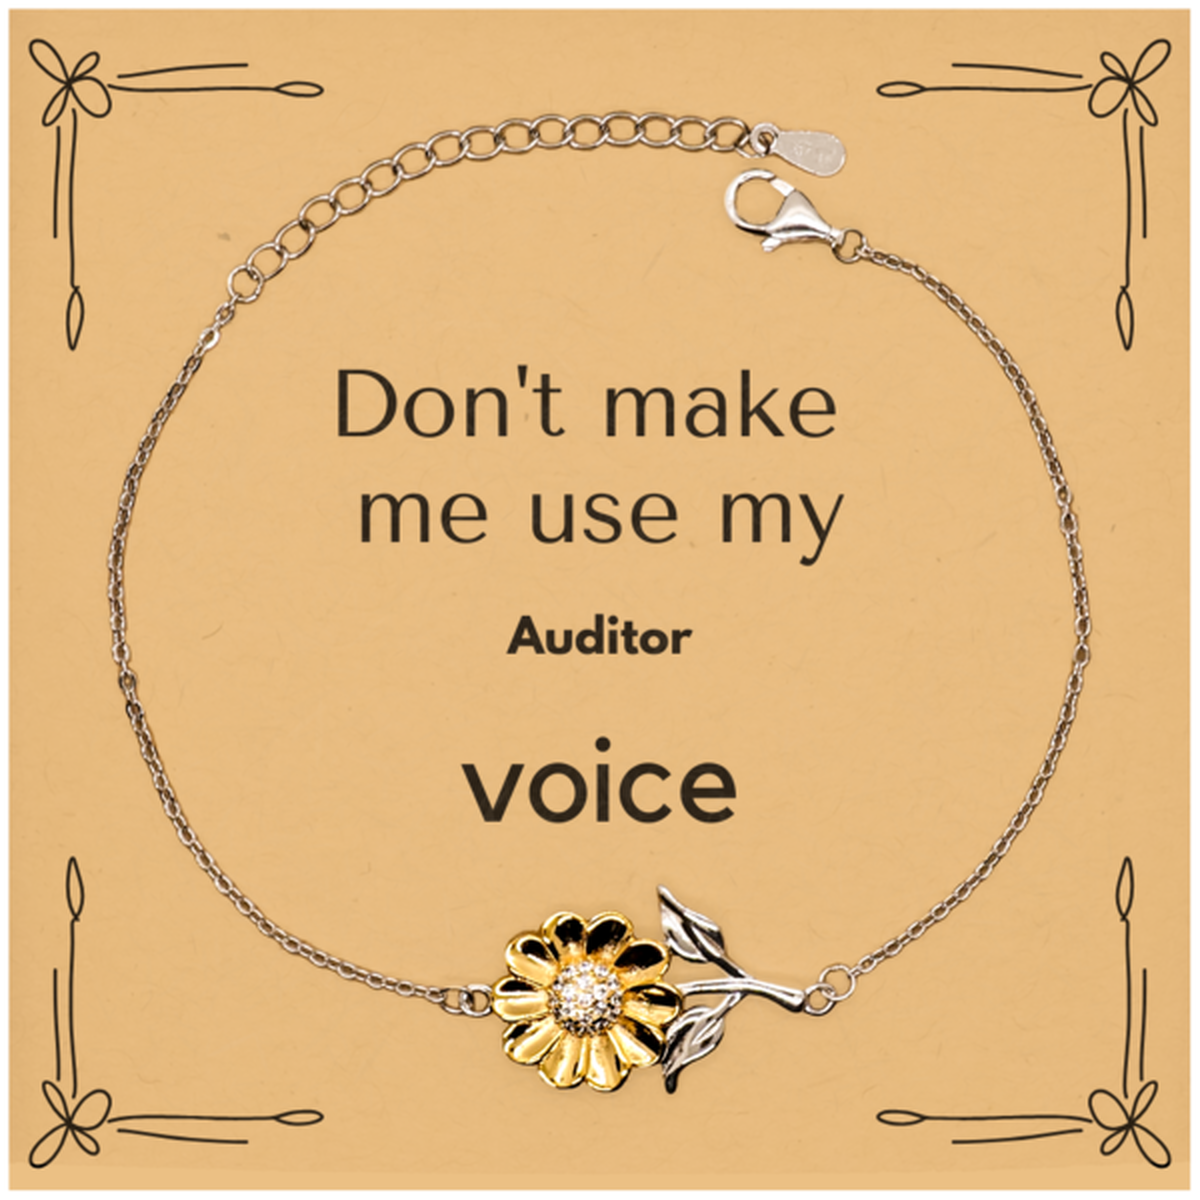 Don't make me use my Auditor voice, Sarcasm Auditor Card Gifts, Christmas Auditor Sunflower Bracelet Birthday Unique Gifts For Auditor Coworkers, Men, Women, Colleague, Friends